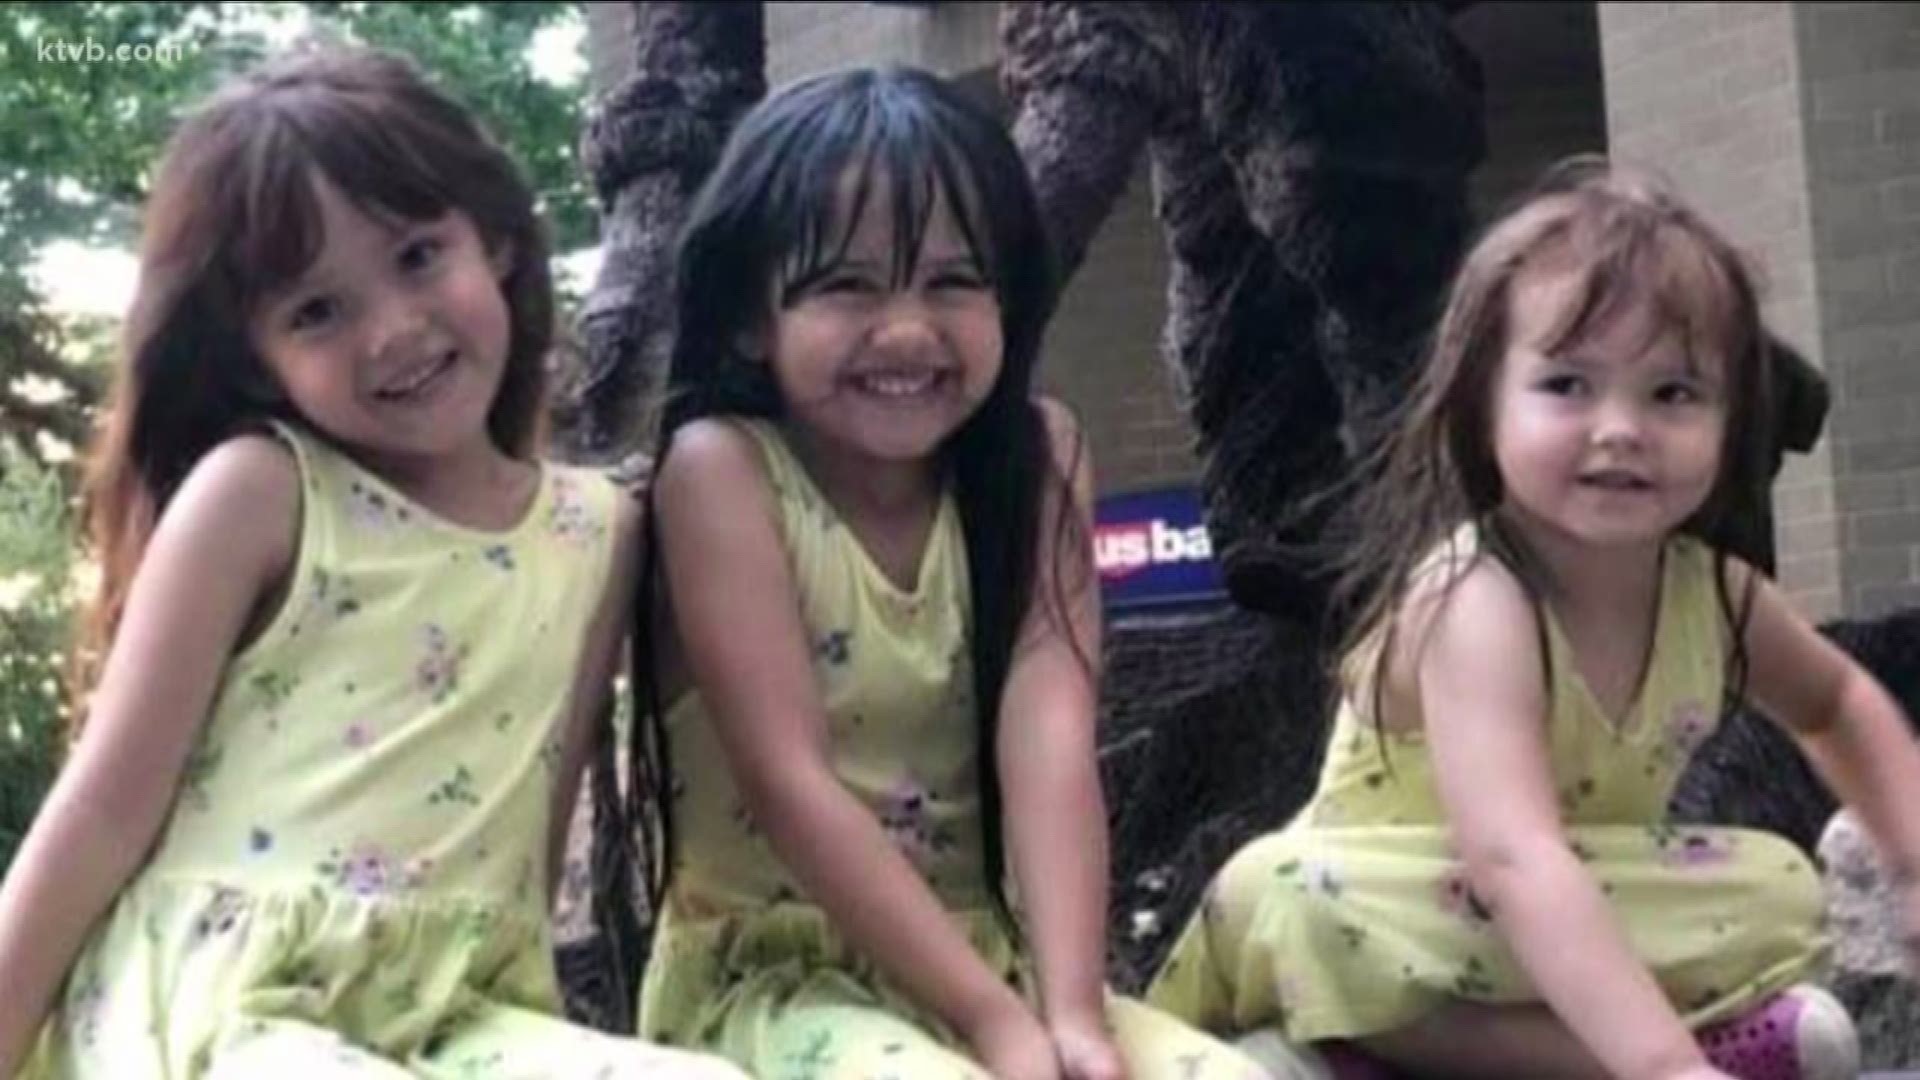 The three sisters were killed after their family's car was hit by a drunk driver on Saturday, police said.